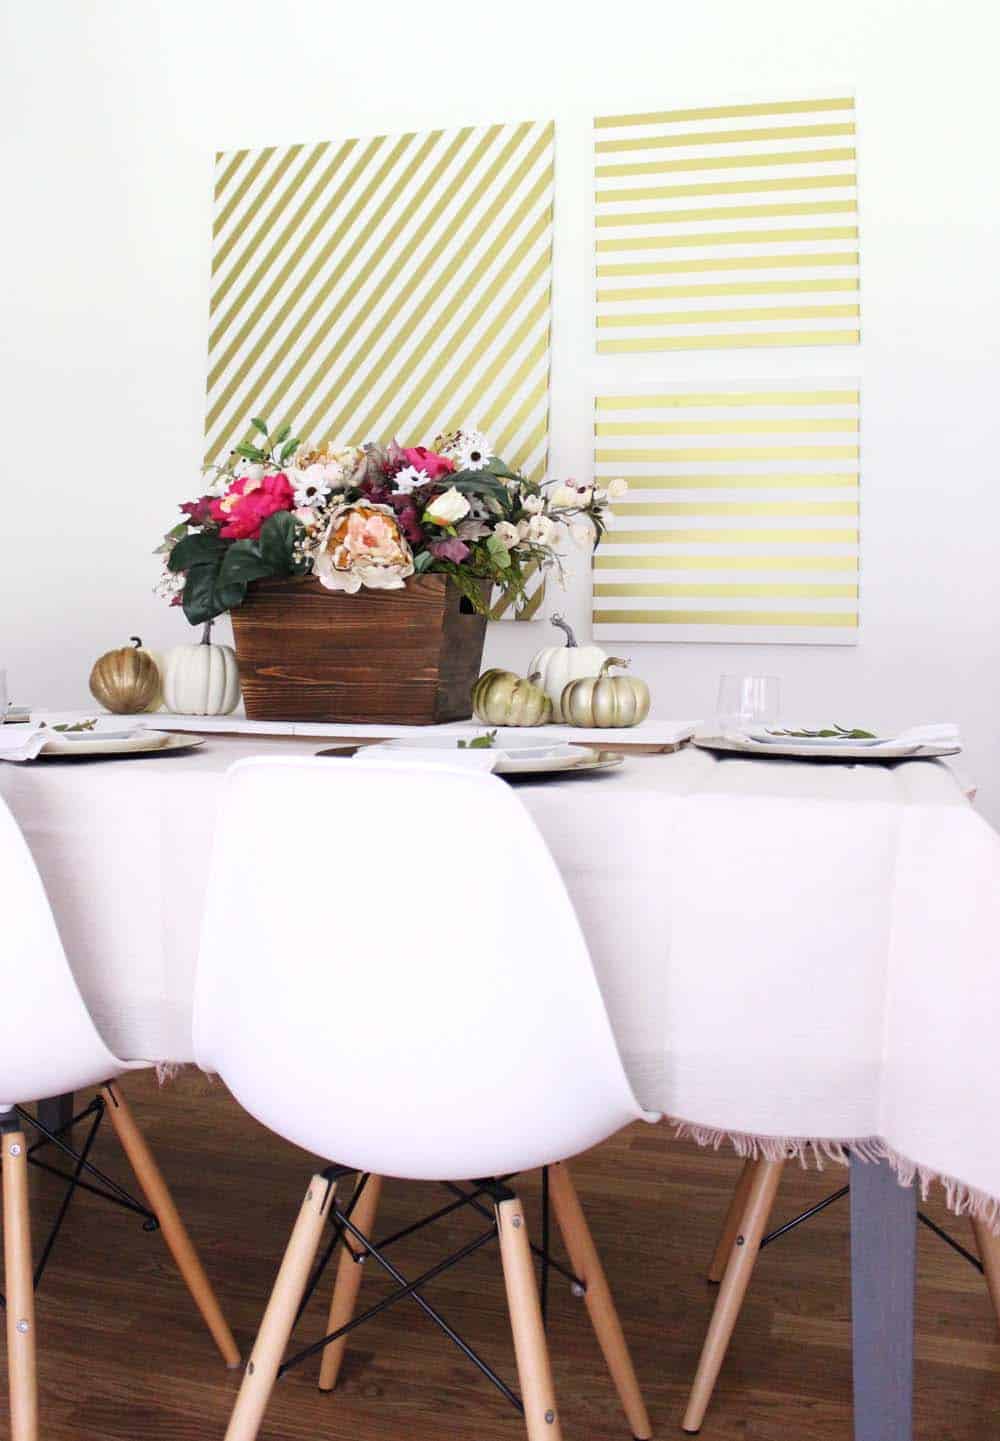 This fall table decor is perfect for thanksgiving!! You can't go wrong with floral table decorations!